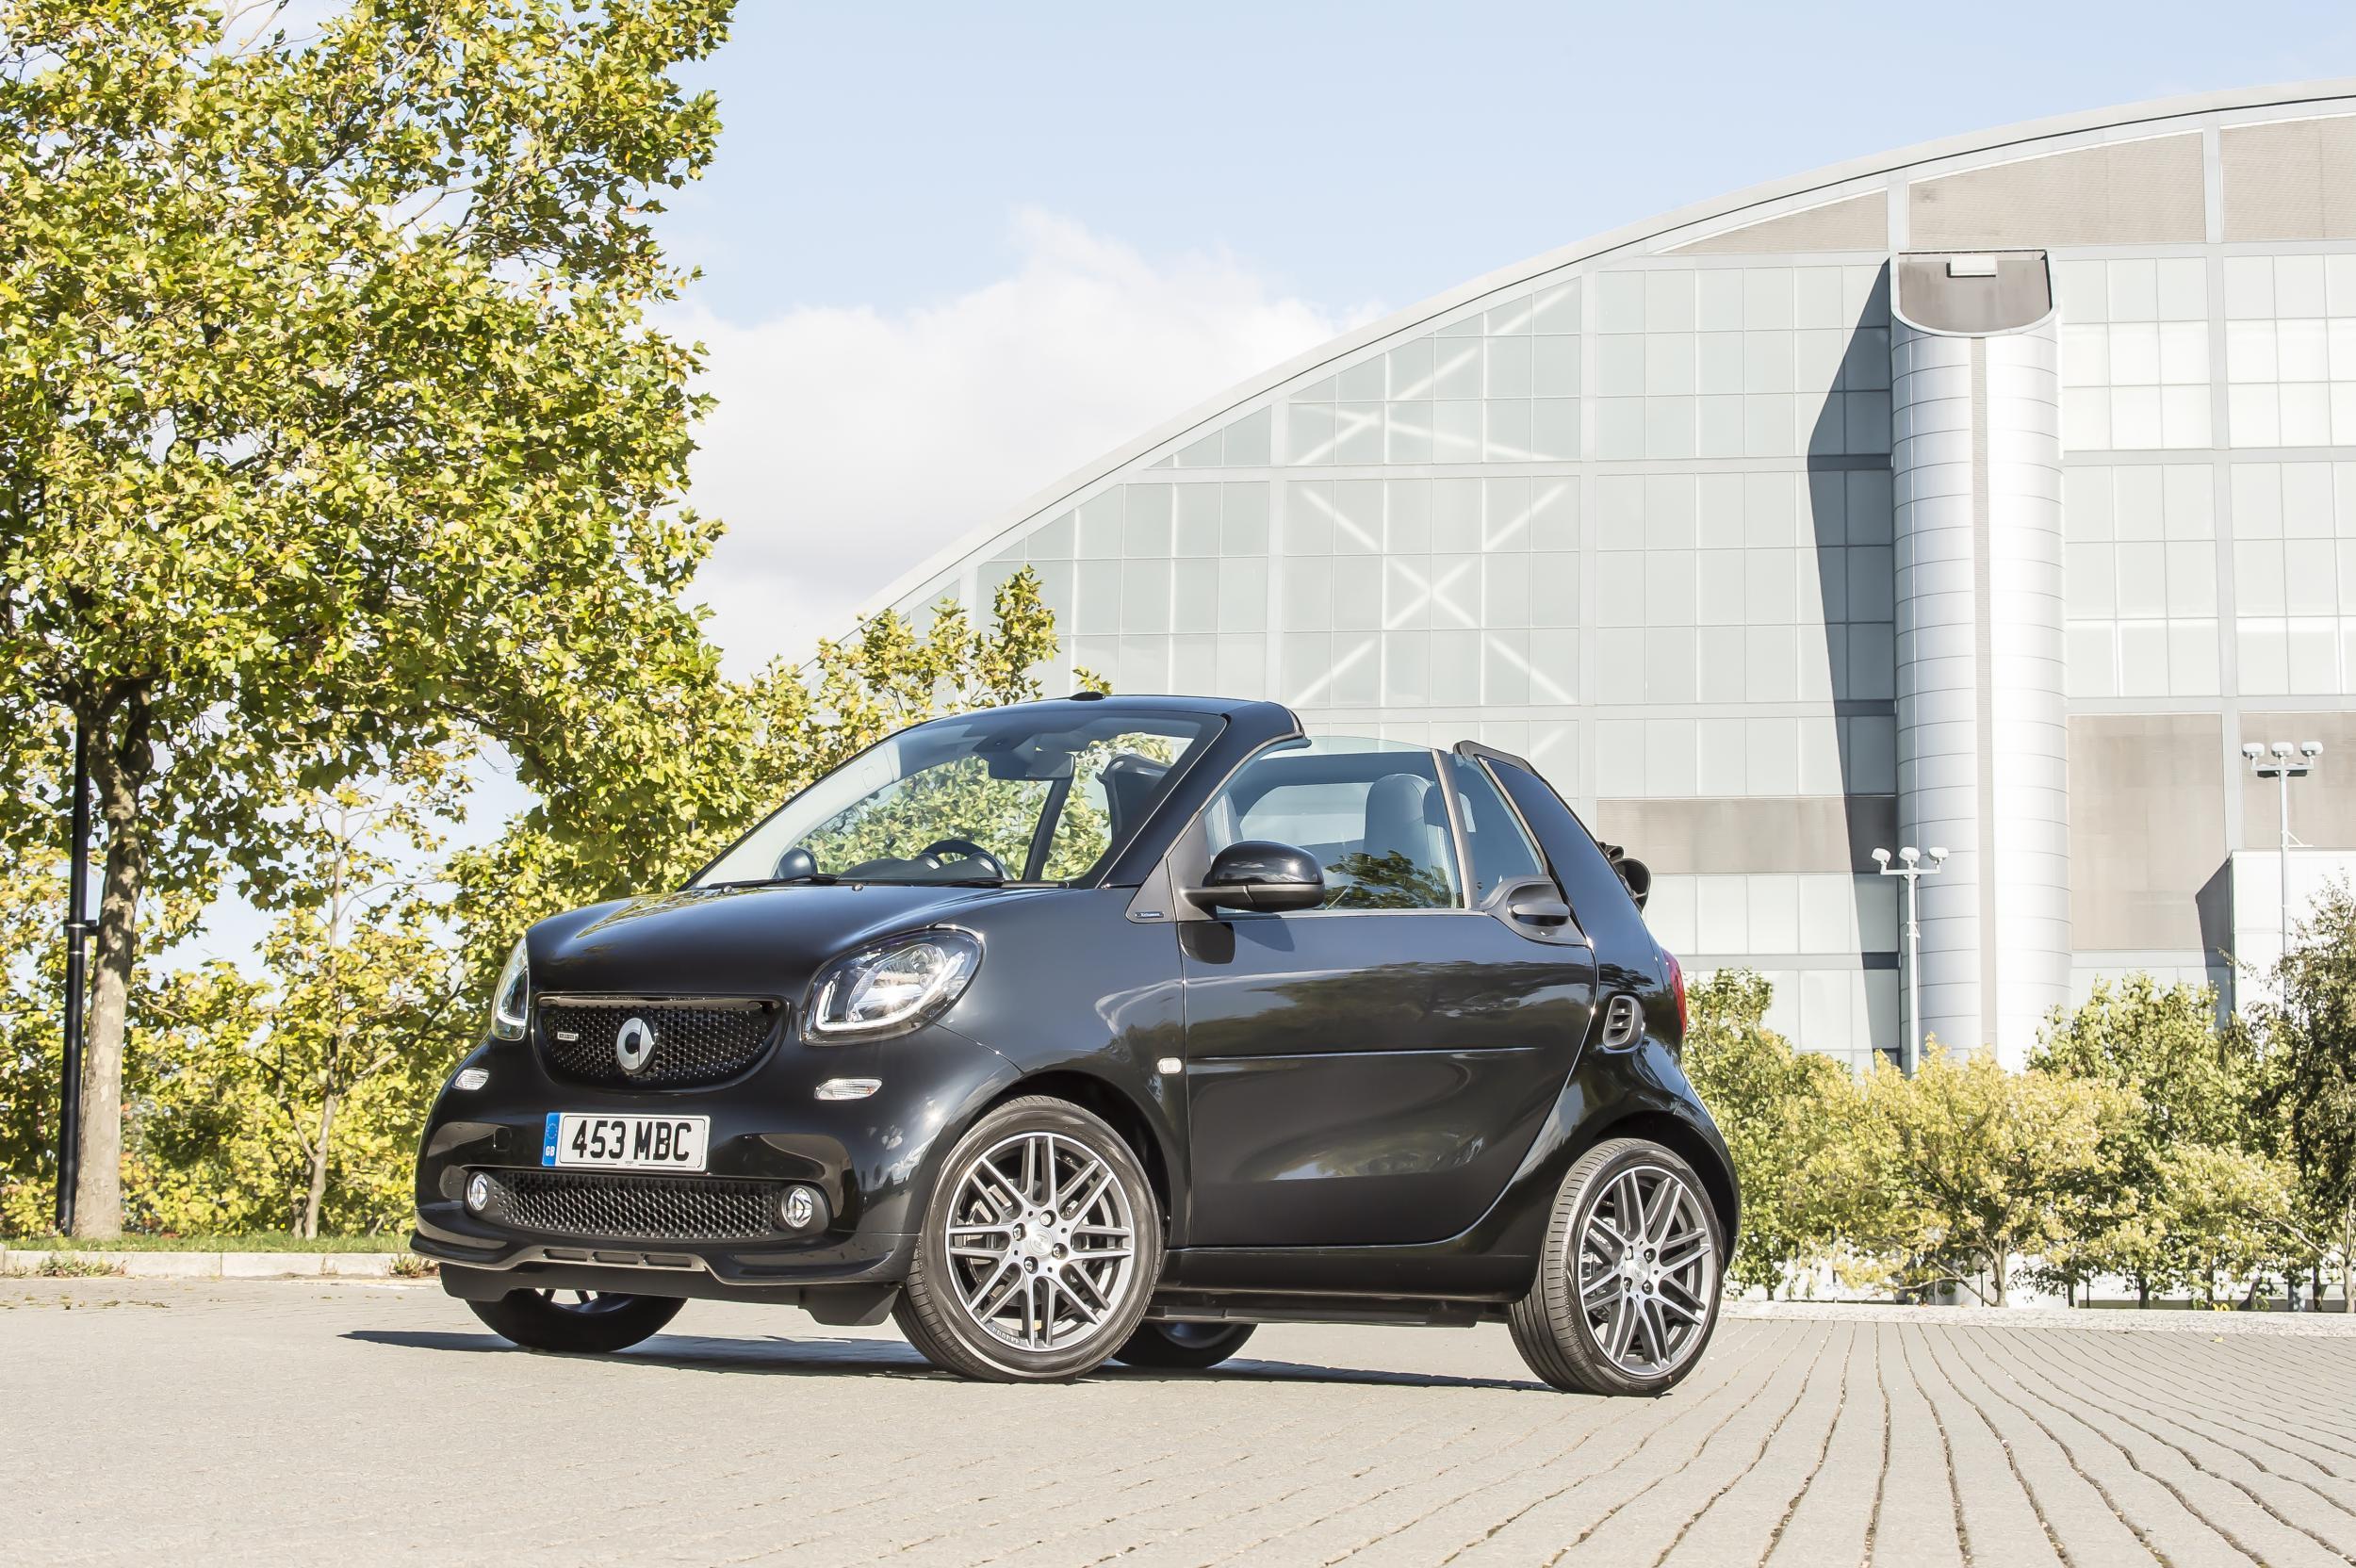 Even the once famously diminutive Smart car hasn’t escaped inflation